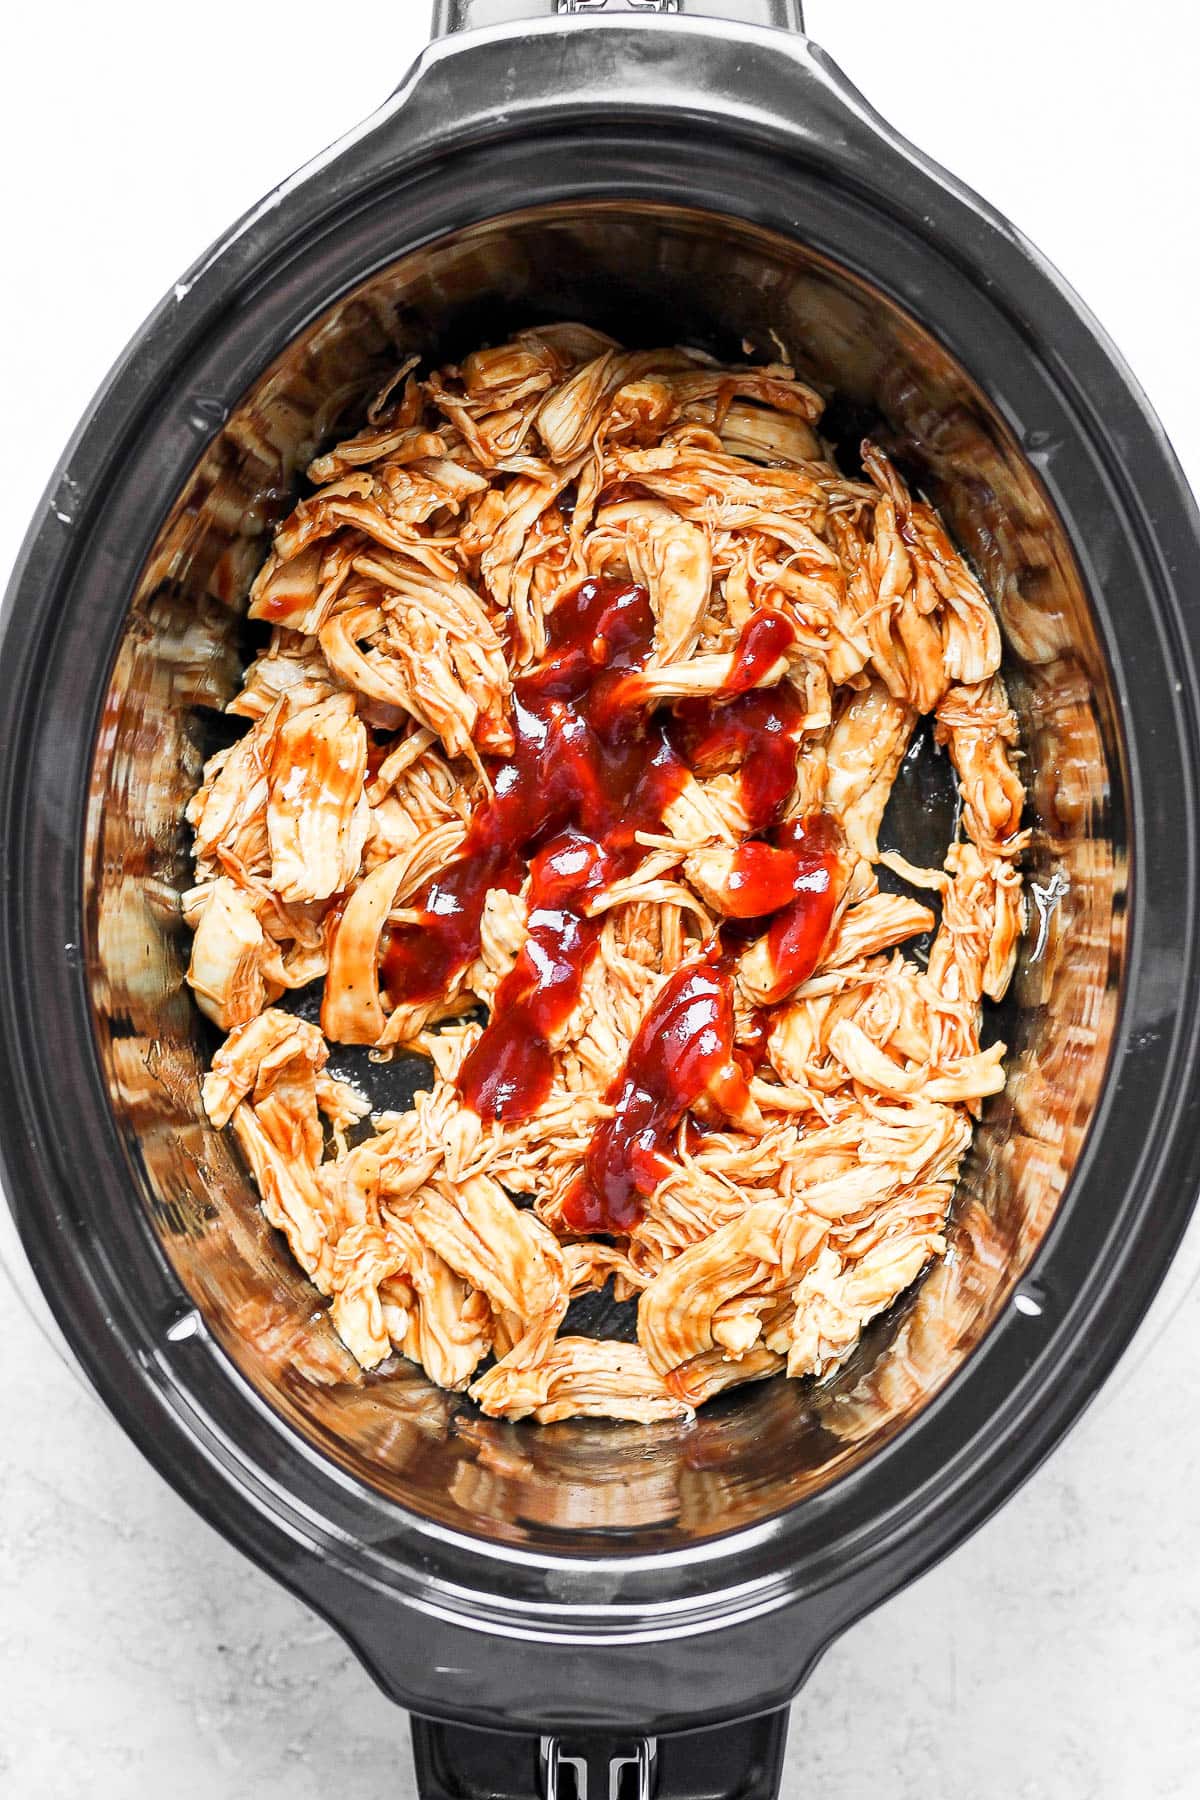 Cooked, shredded chicken in a slow cooker with BBQ sauce.